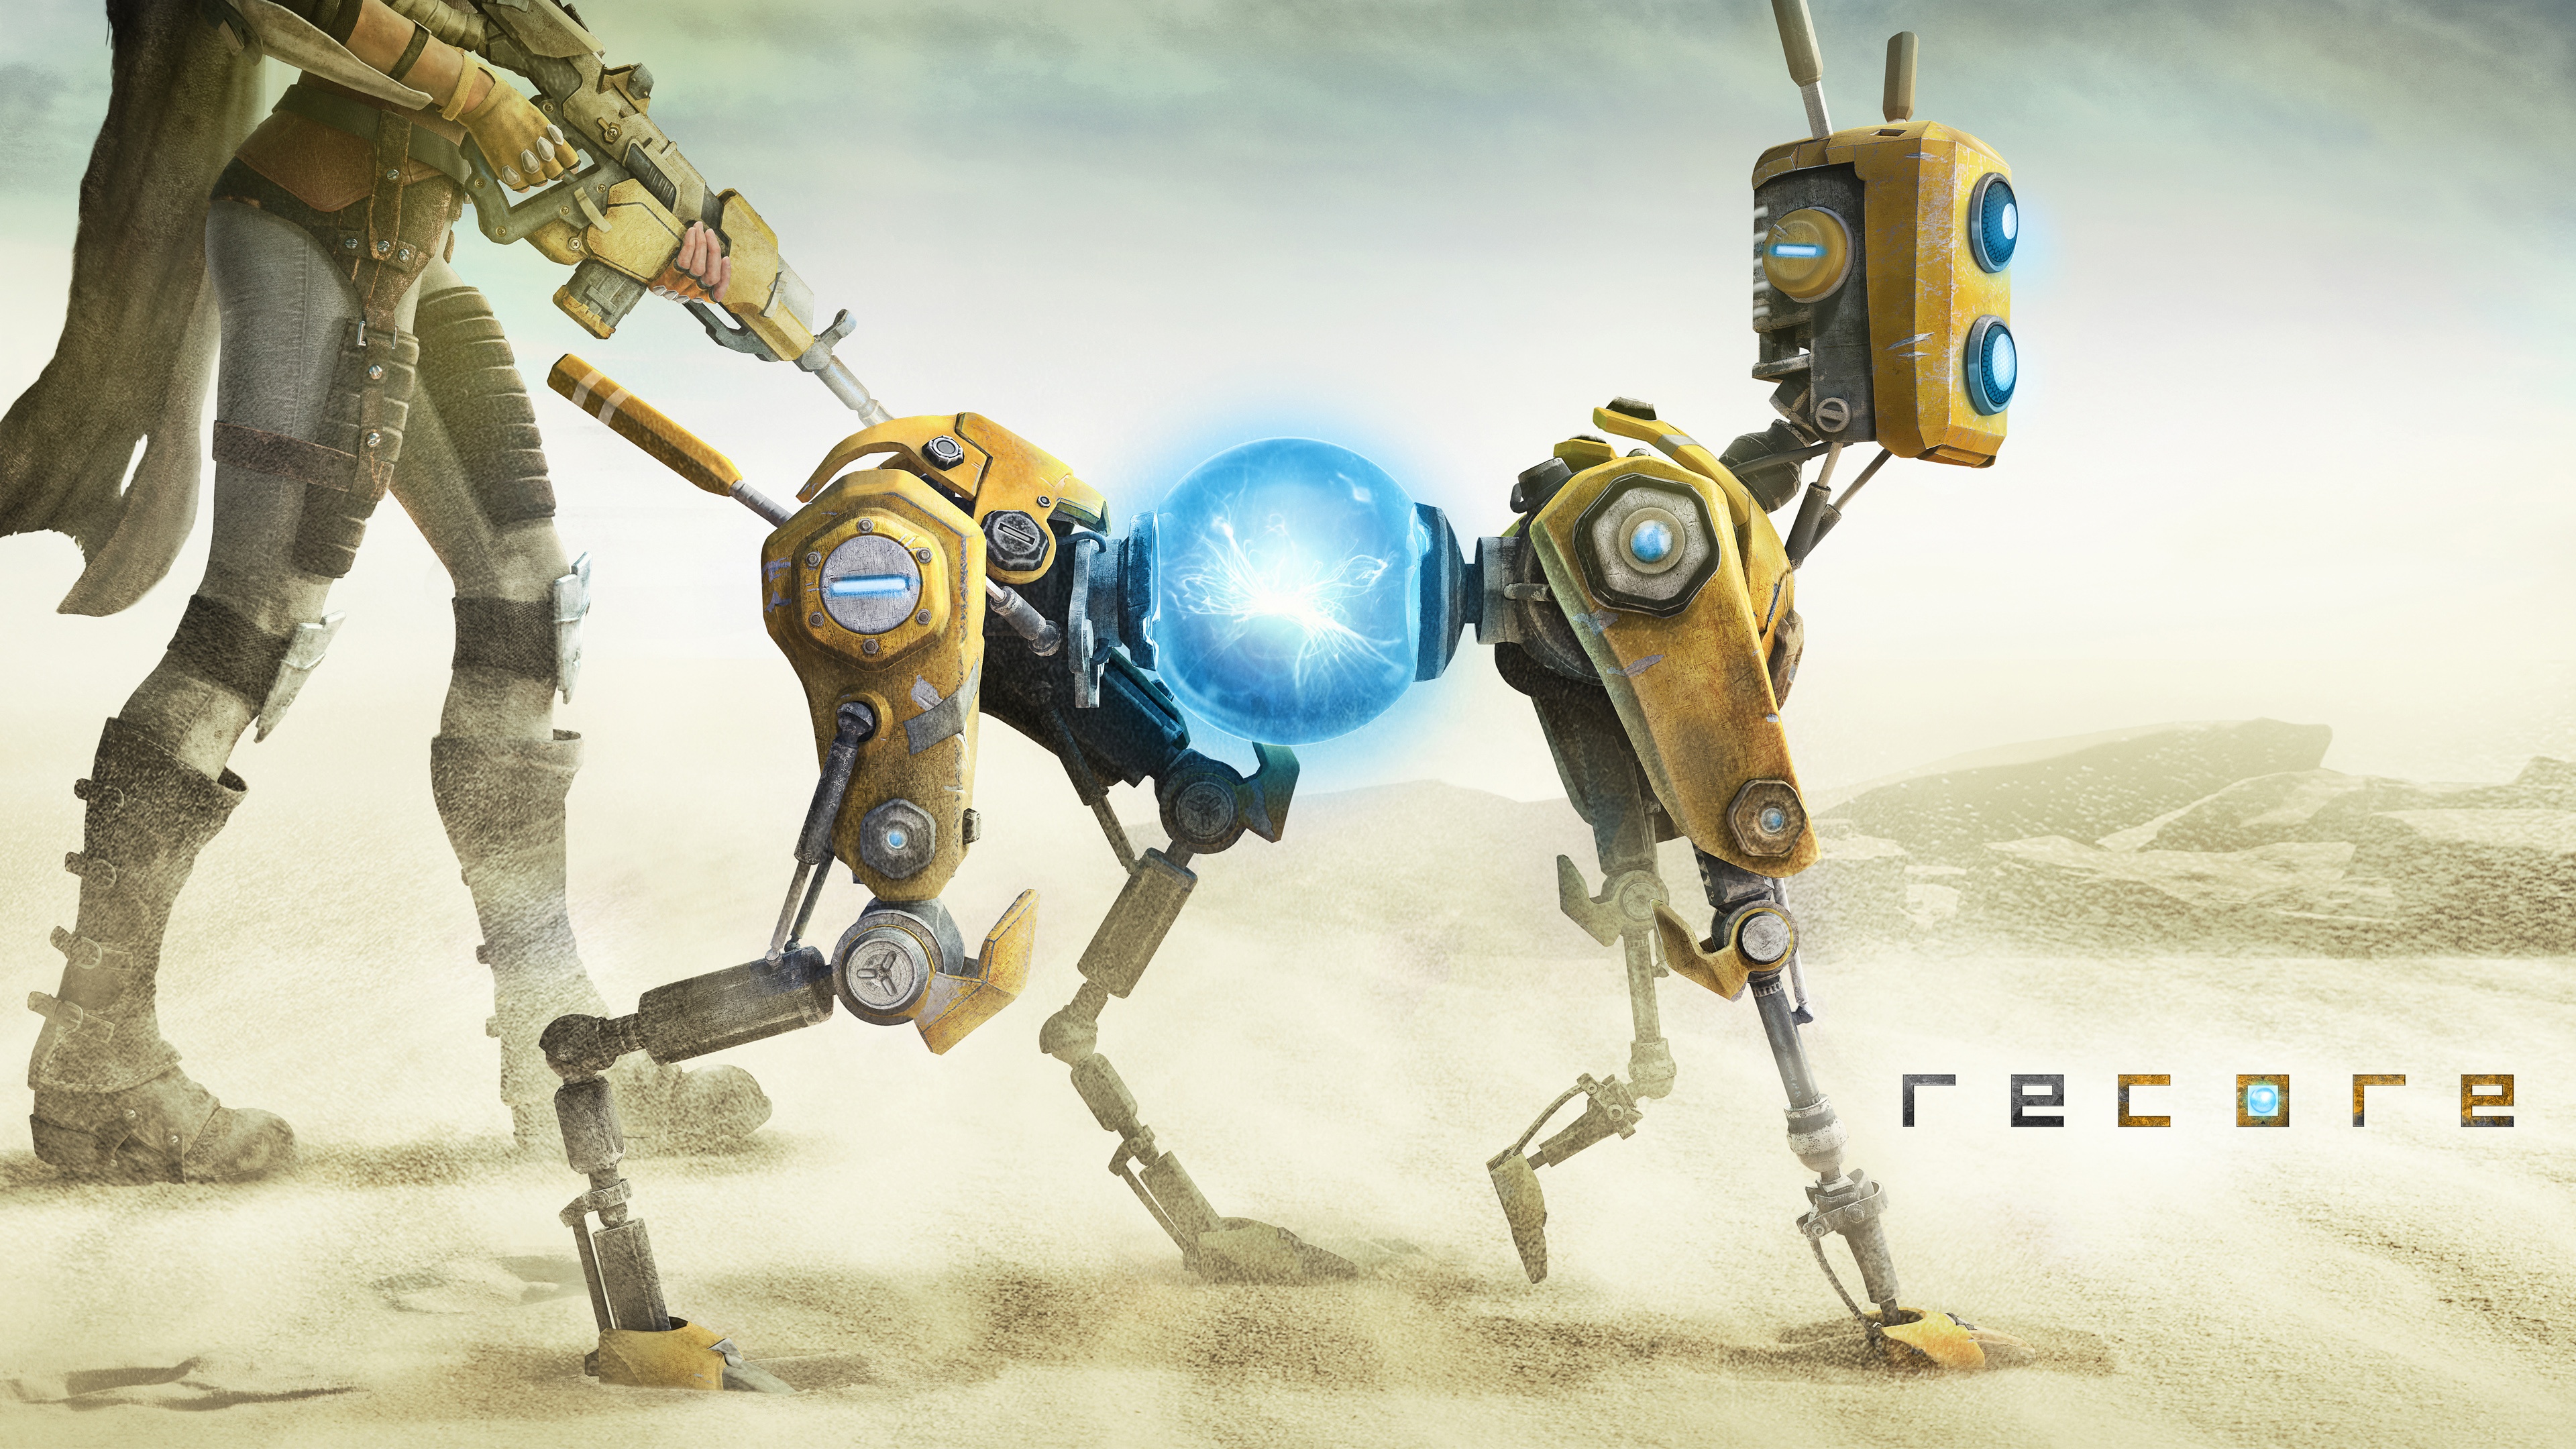 recore 2016 game 3840 x 2160 55